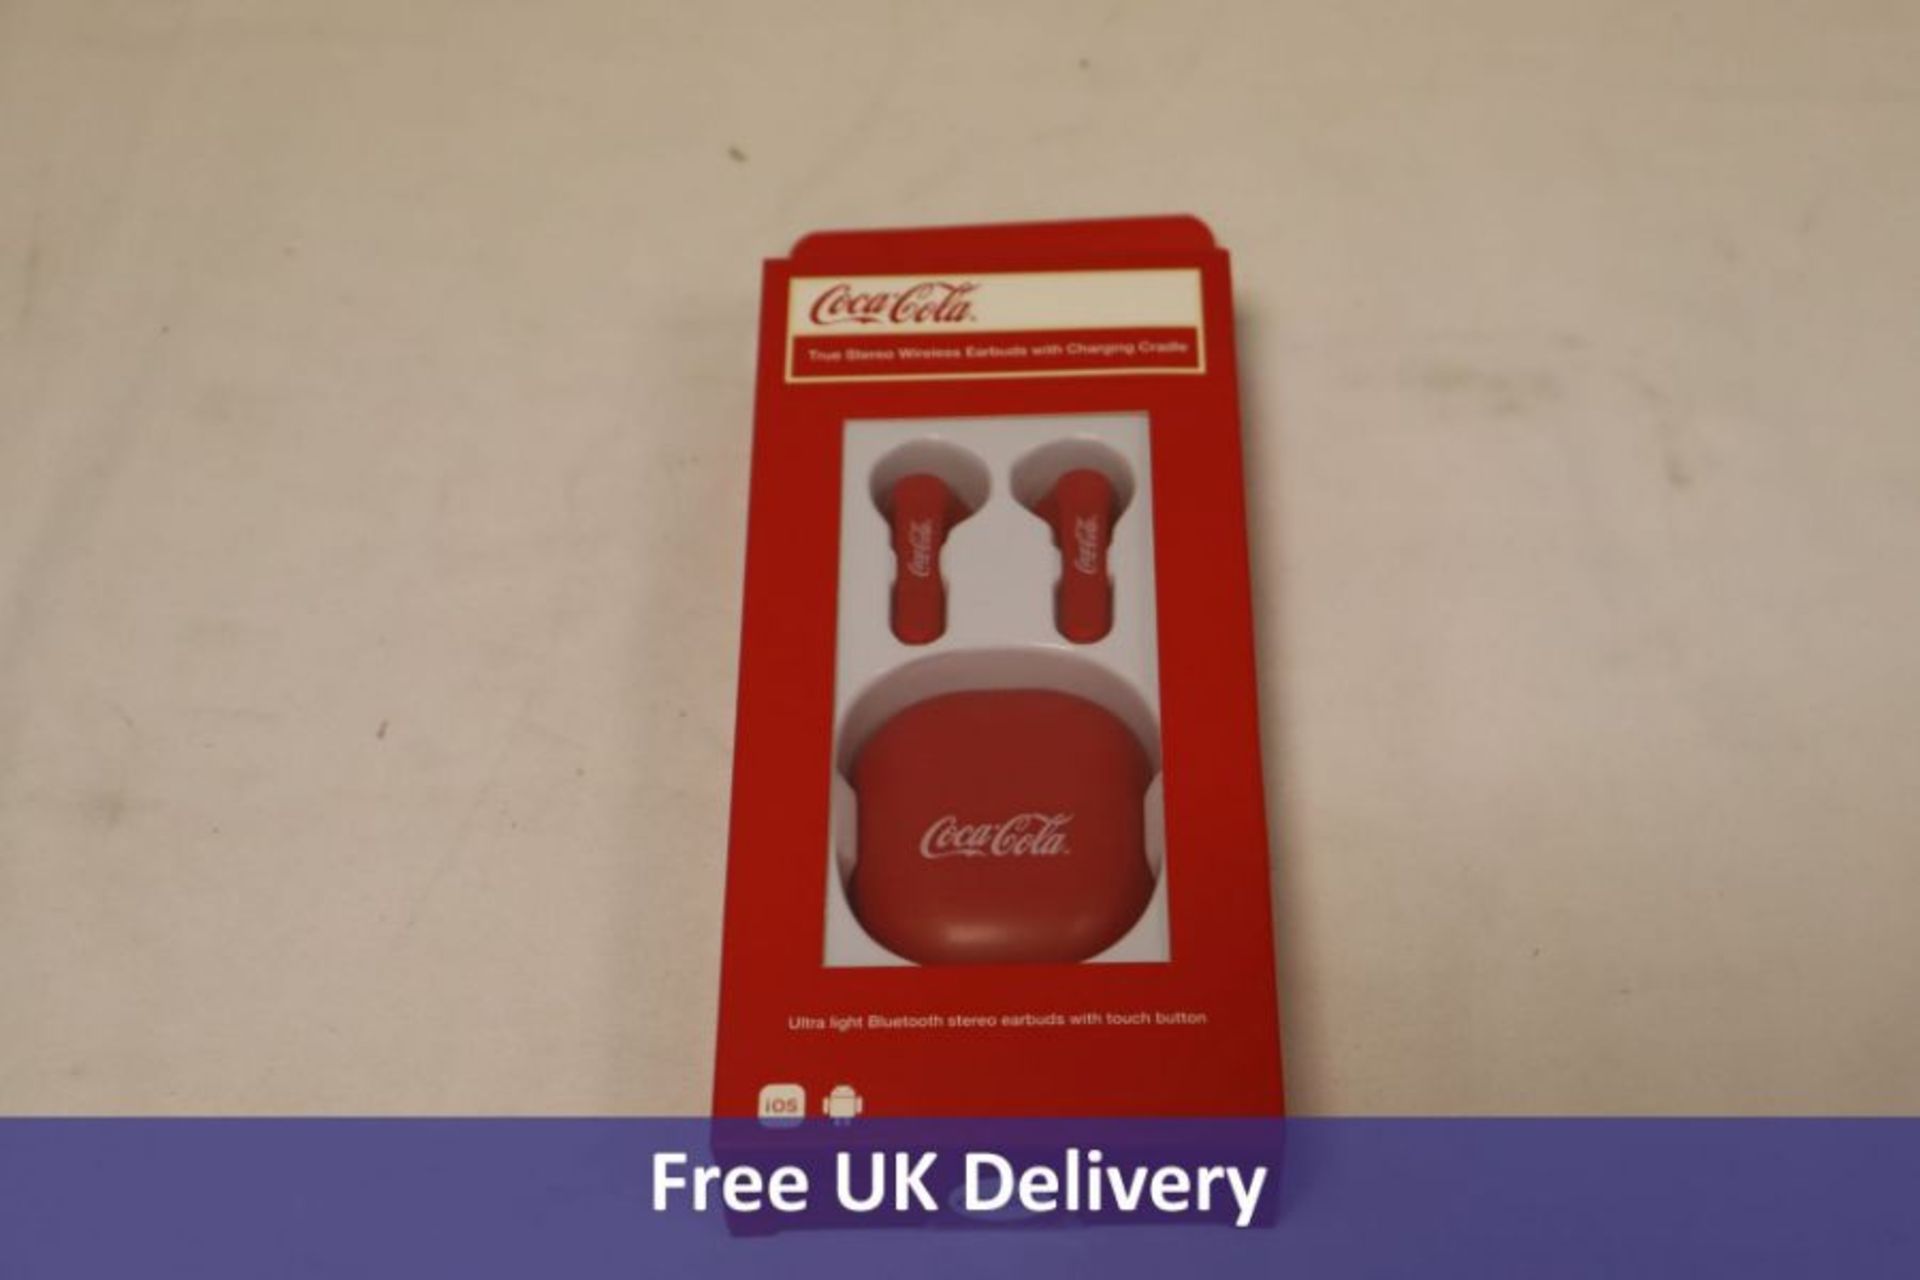 Eight Official Coca-Cola True Stereo Wireless Earbuds with Charging Cradle